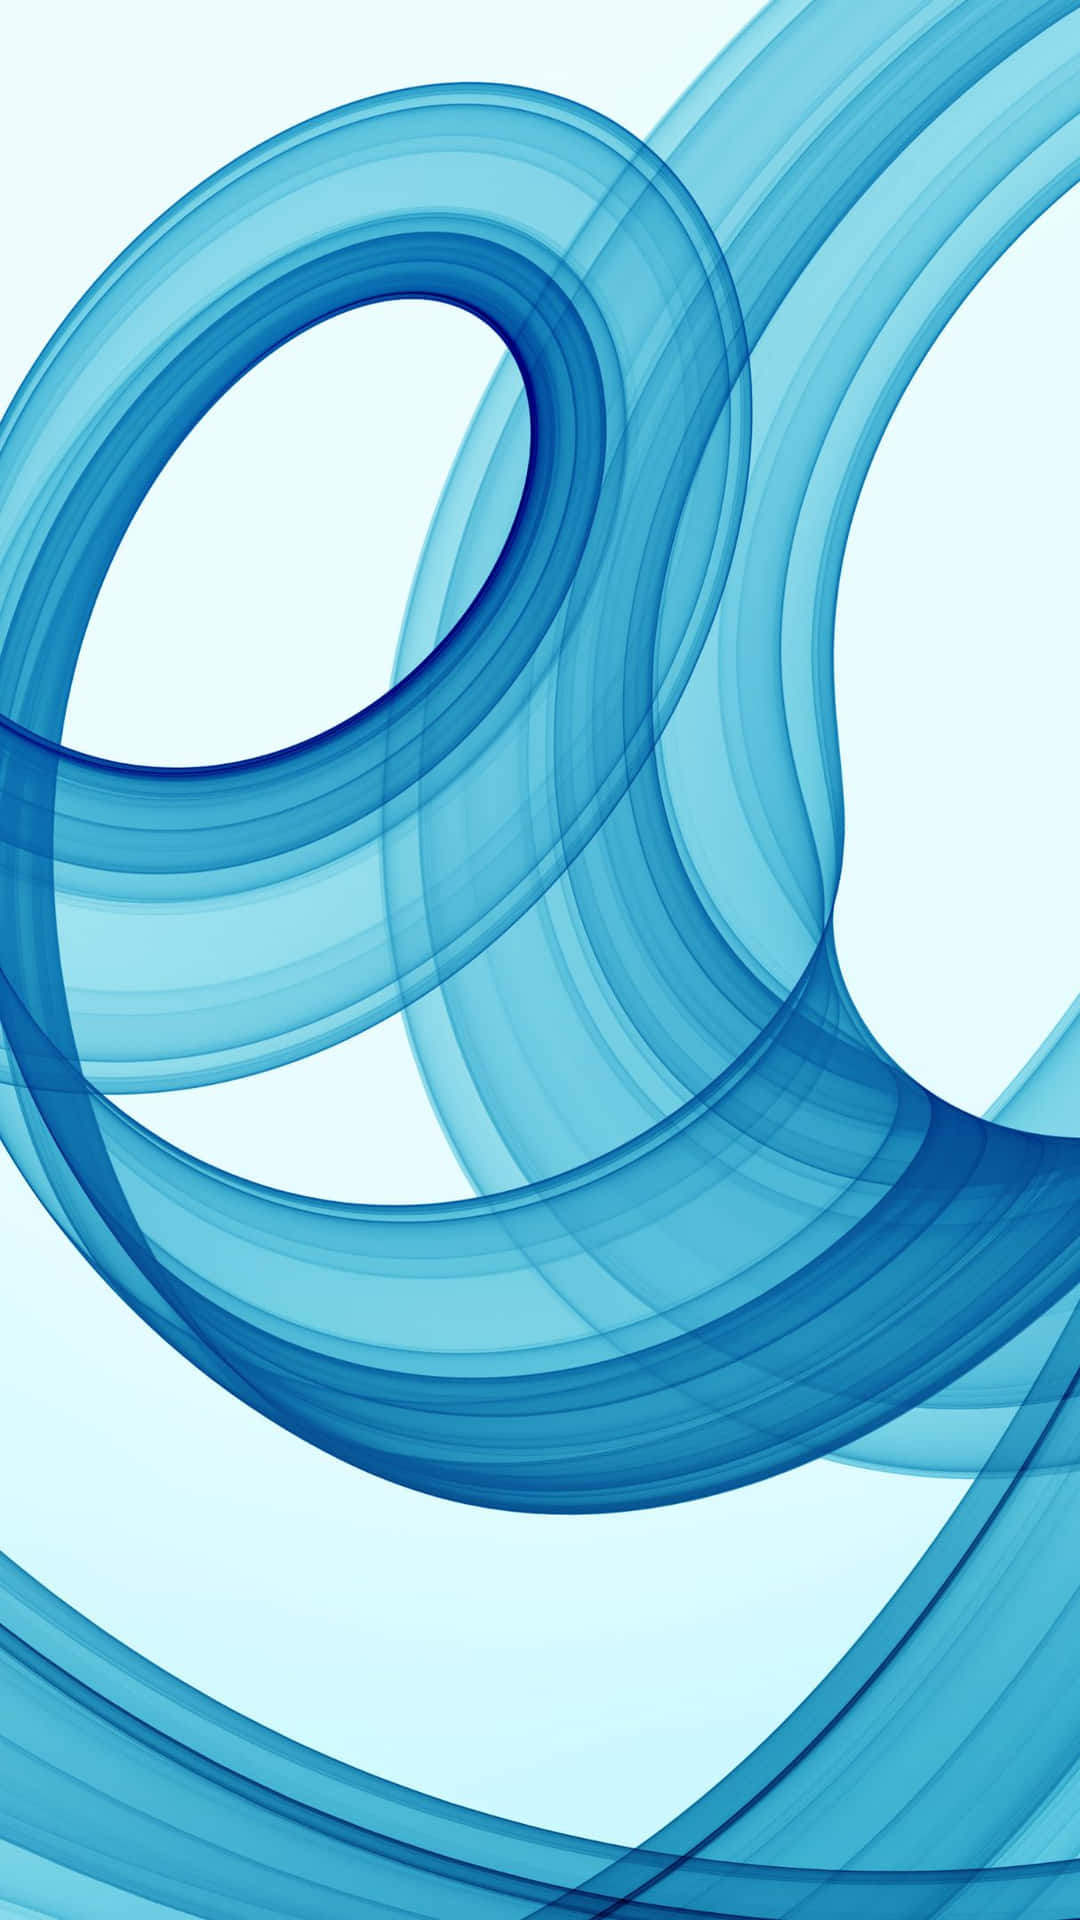 A vibrant and abstract background of blue swirls